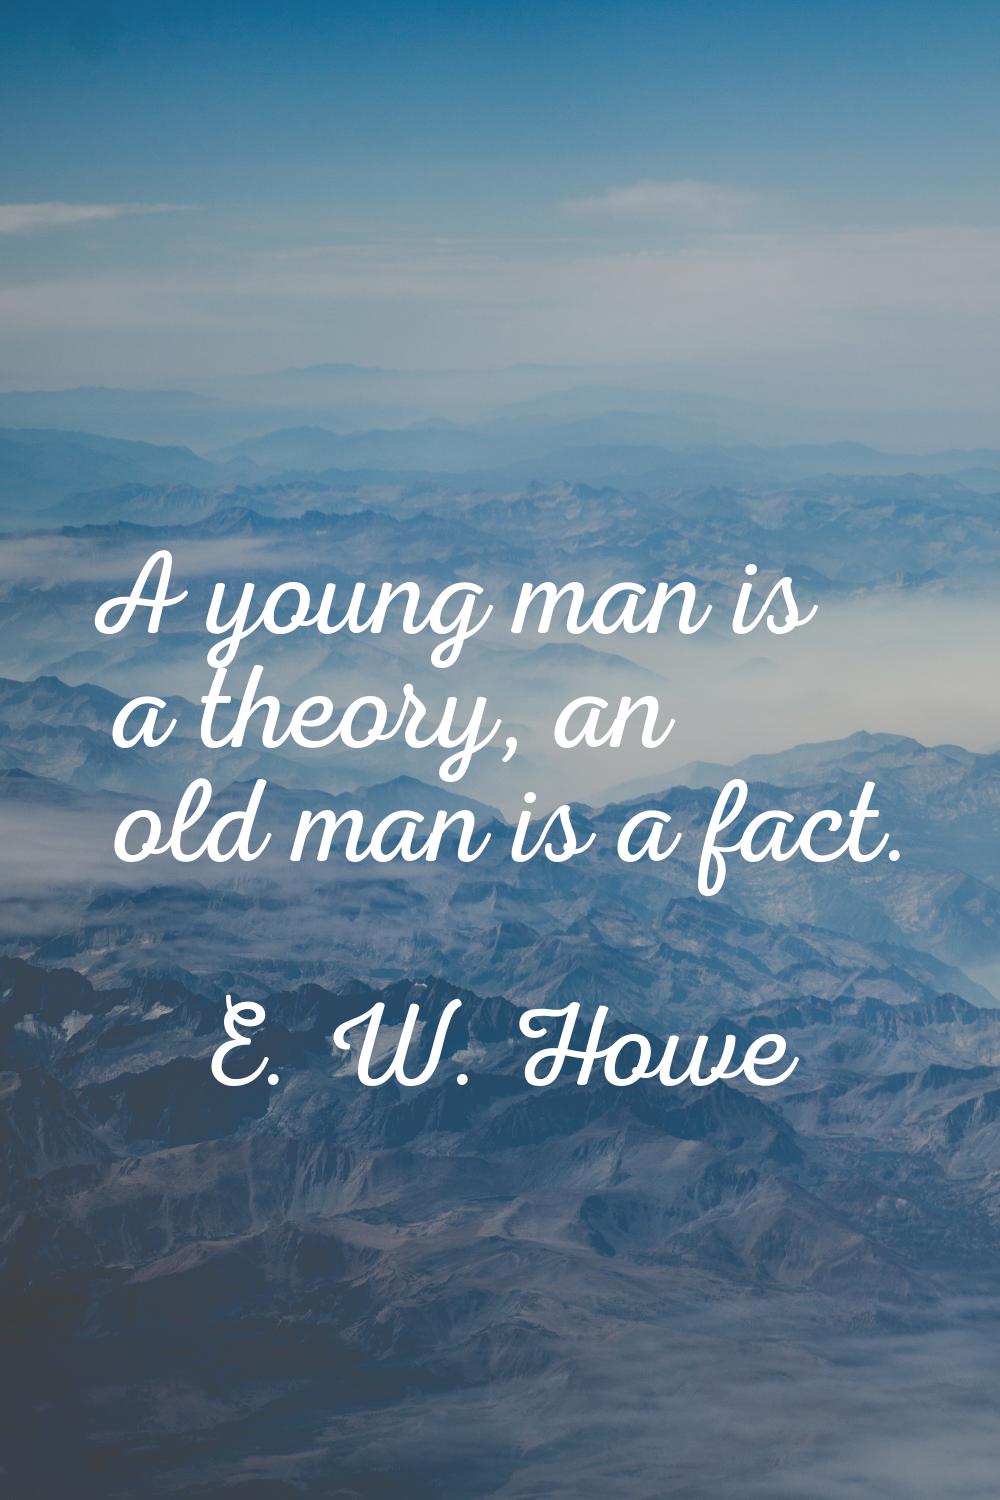 A young man is a theory, an old man is a fact.